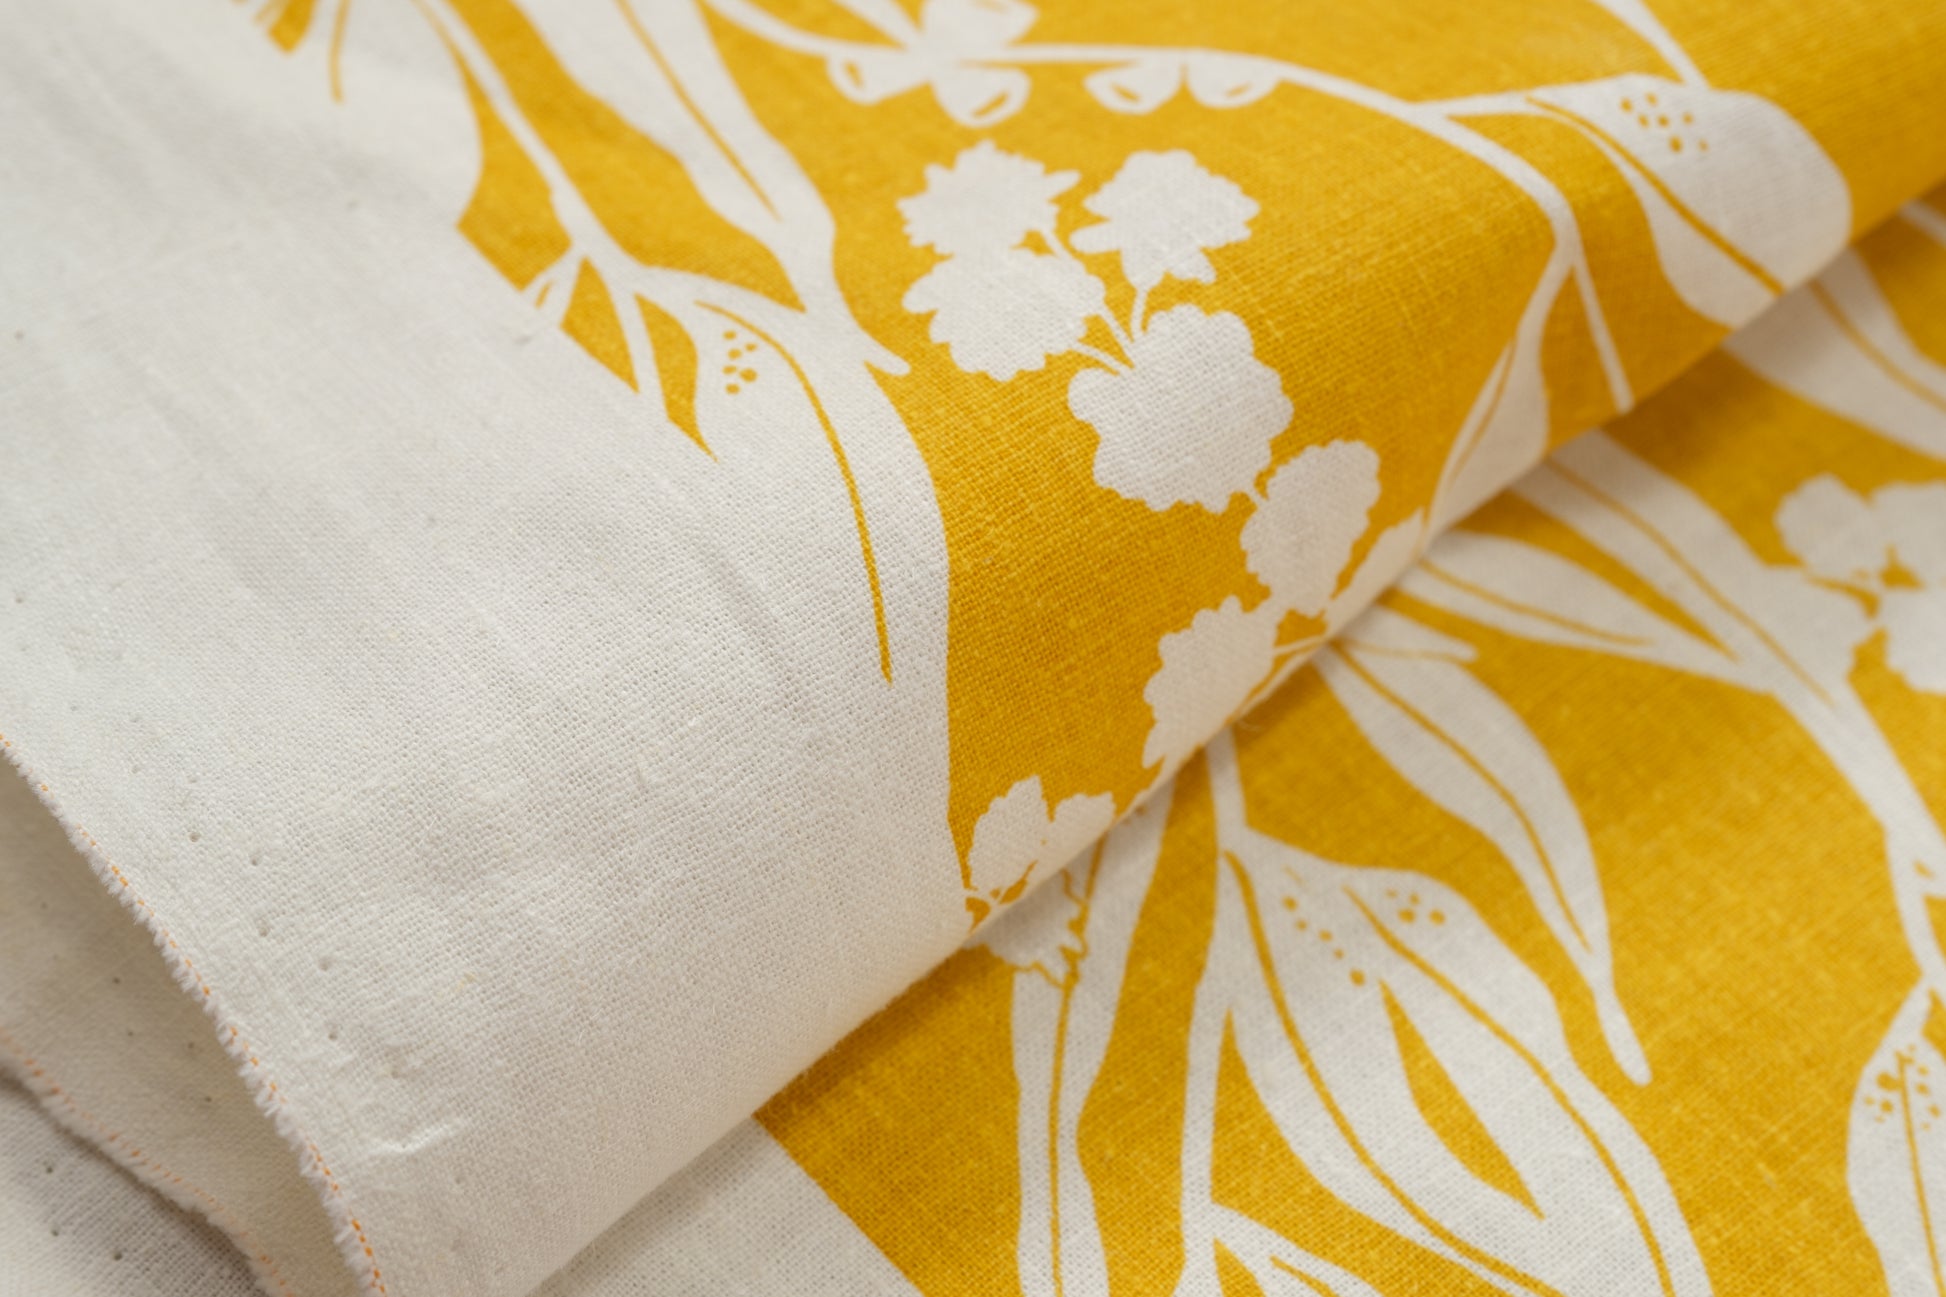 Organic cotton and hemp fabric screenprinted with pattern Nuts about Wattle in the colour Mustard. Designed and screenprinted in Melbourne by Femke Textiles.